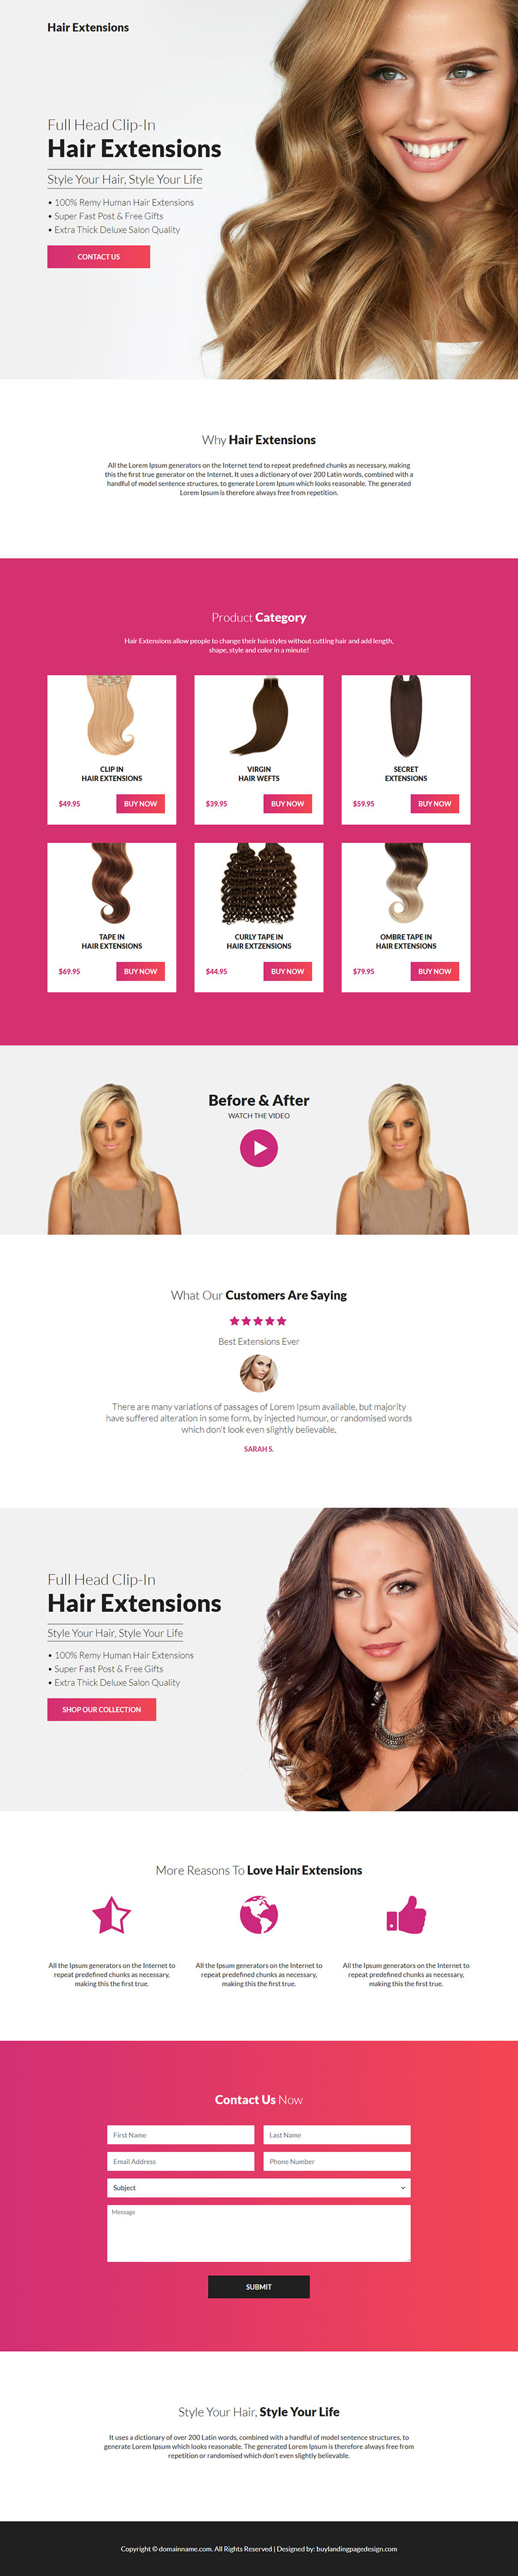 Best Hair Care Landing Page Designs To Drive Quality Traffic